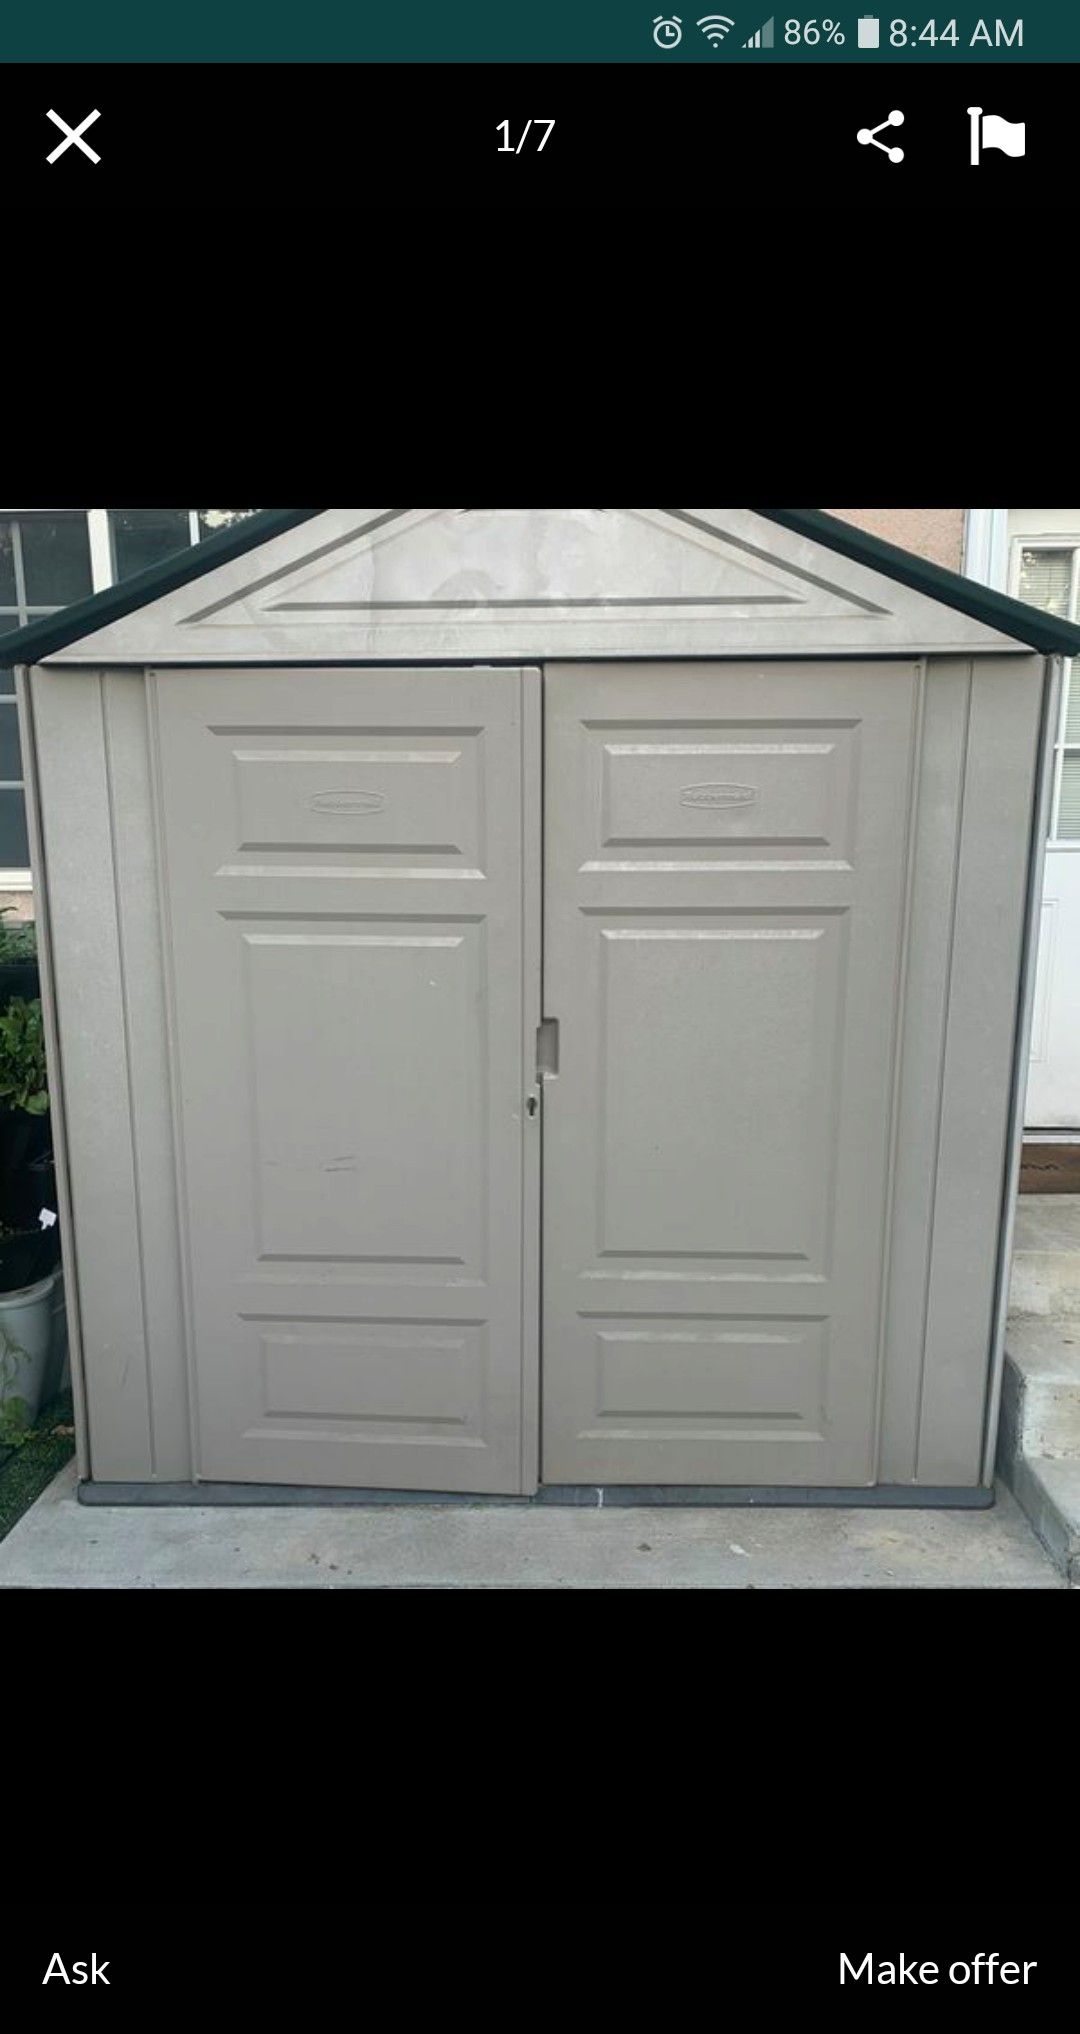 If anyone would like to donate their plastic Shed for my neighbor who just got surgery